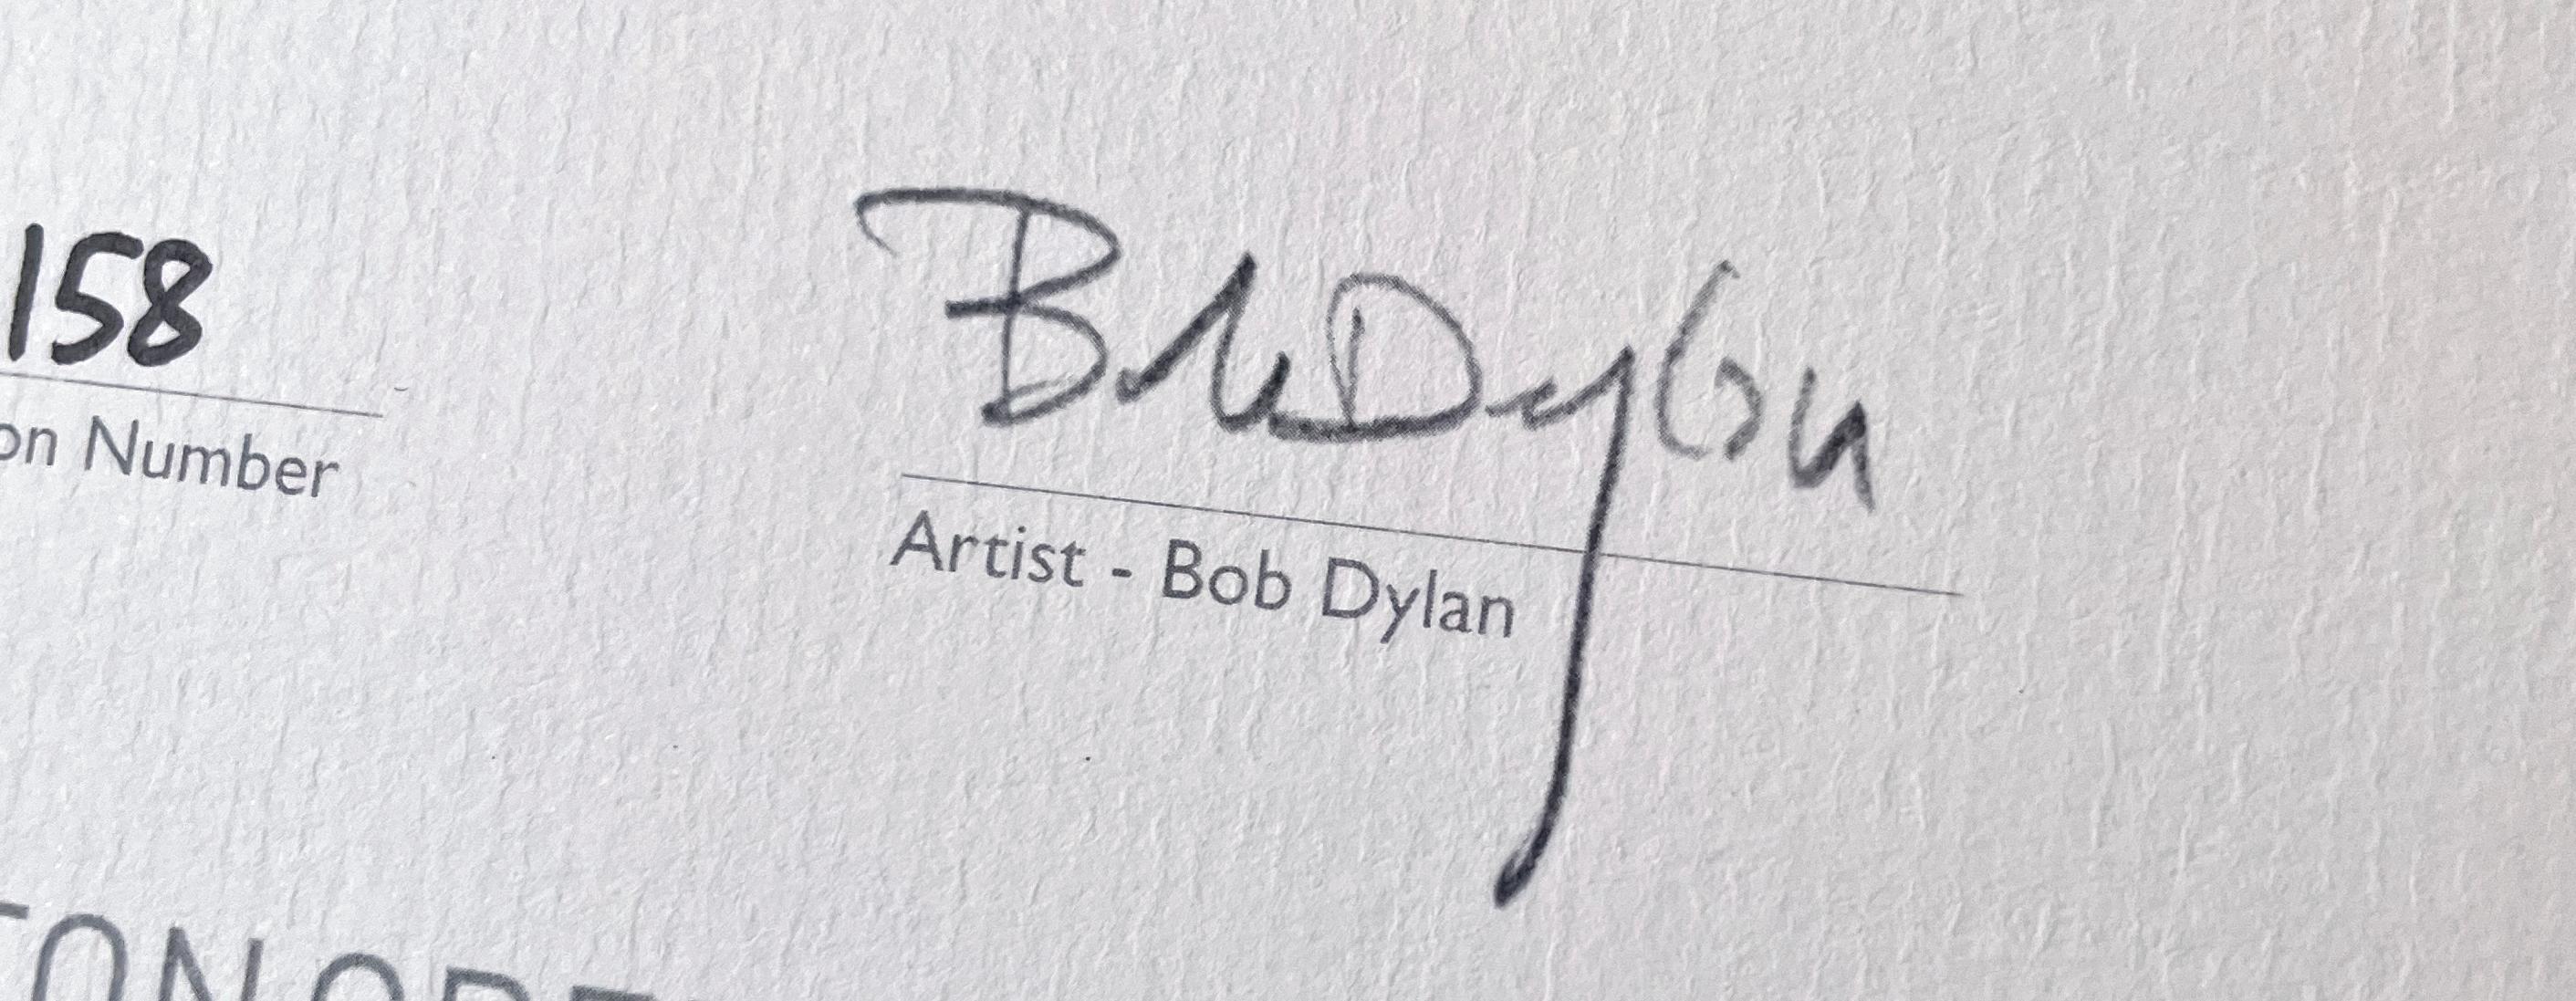 bob dylan paintings for sale